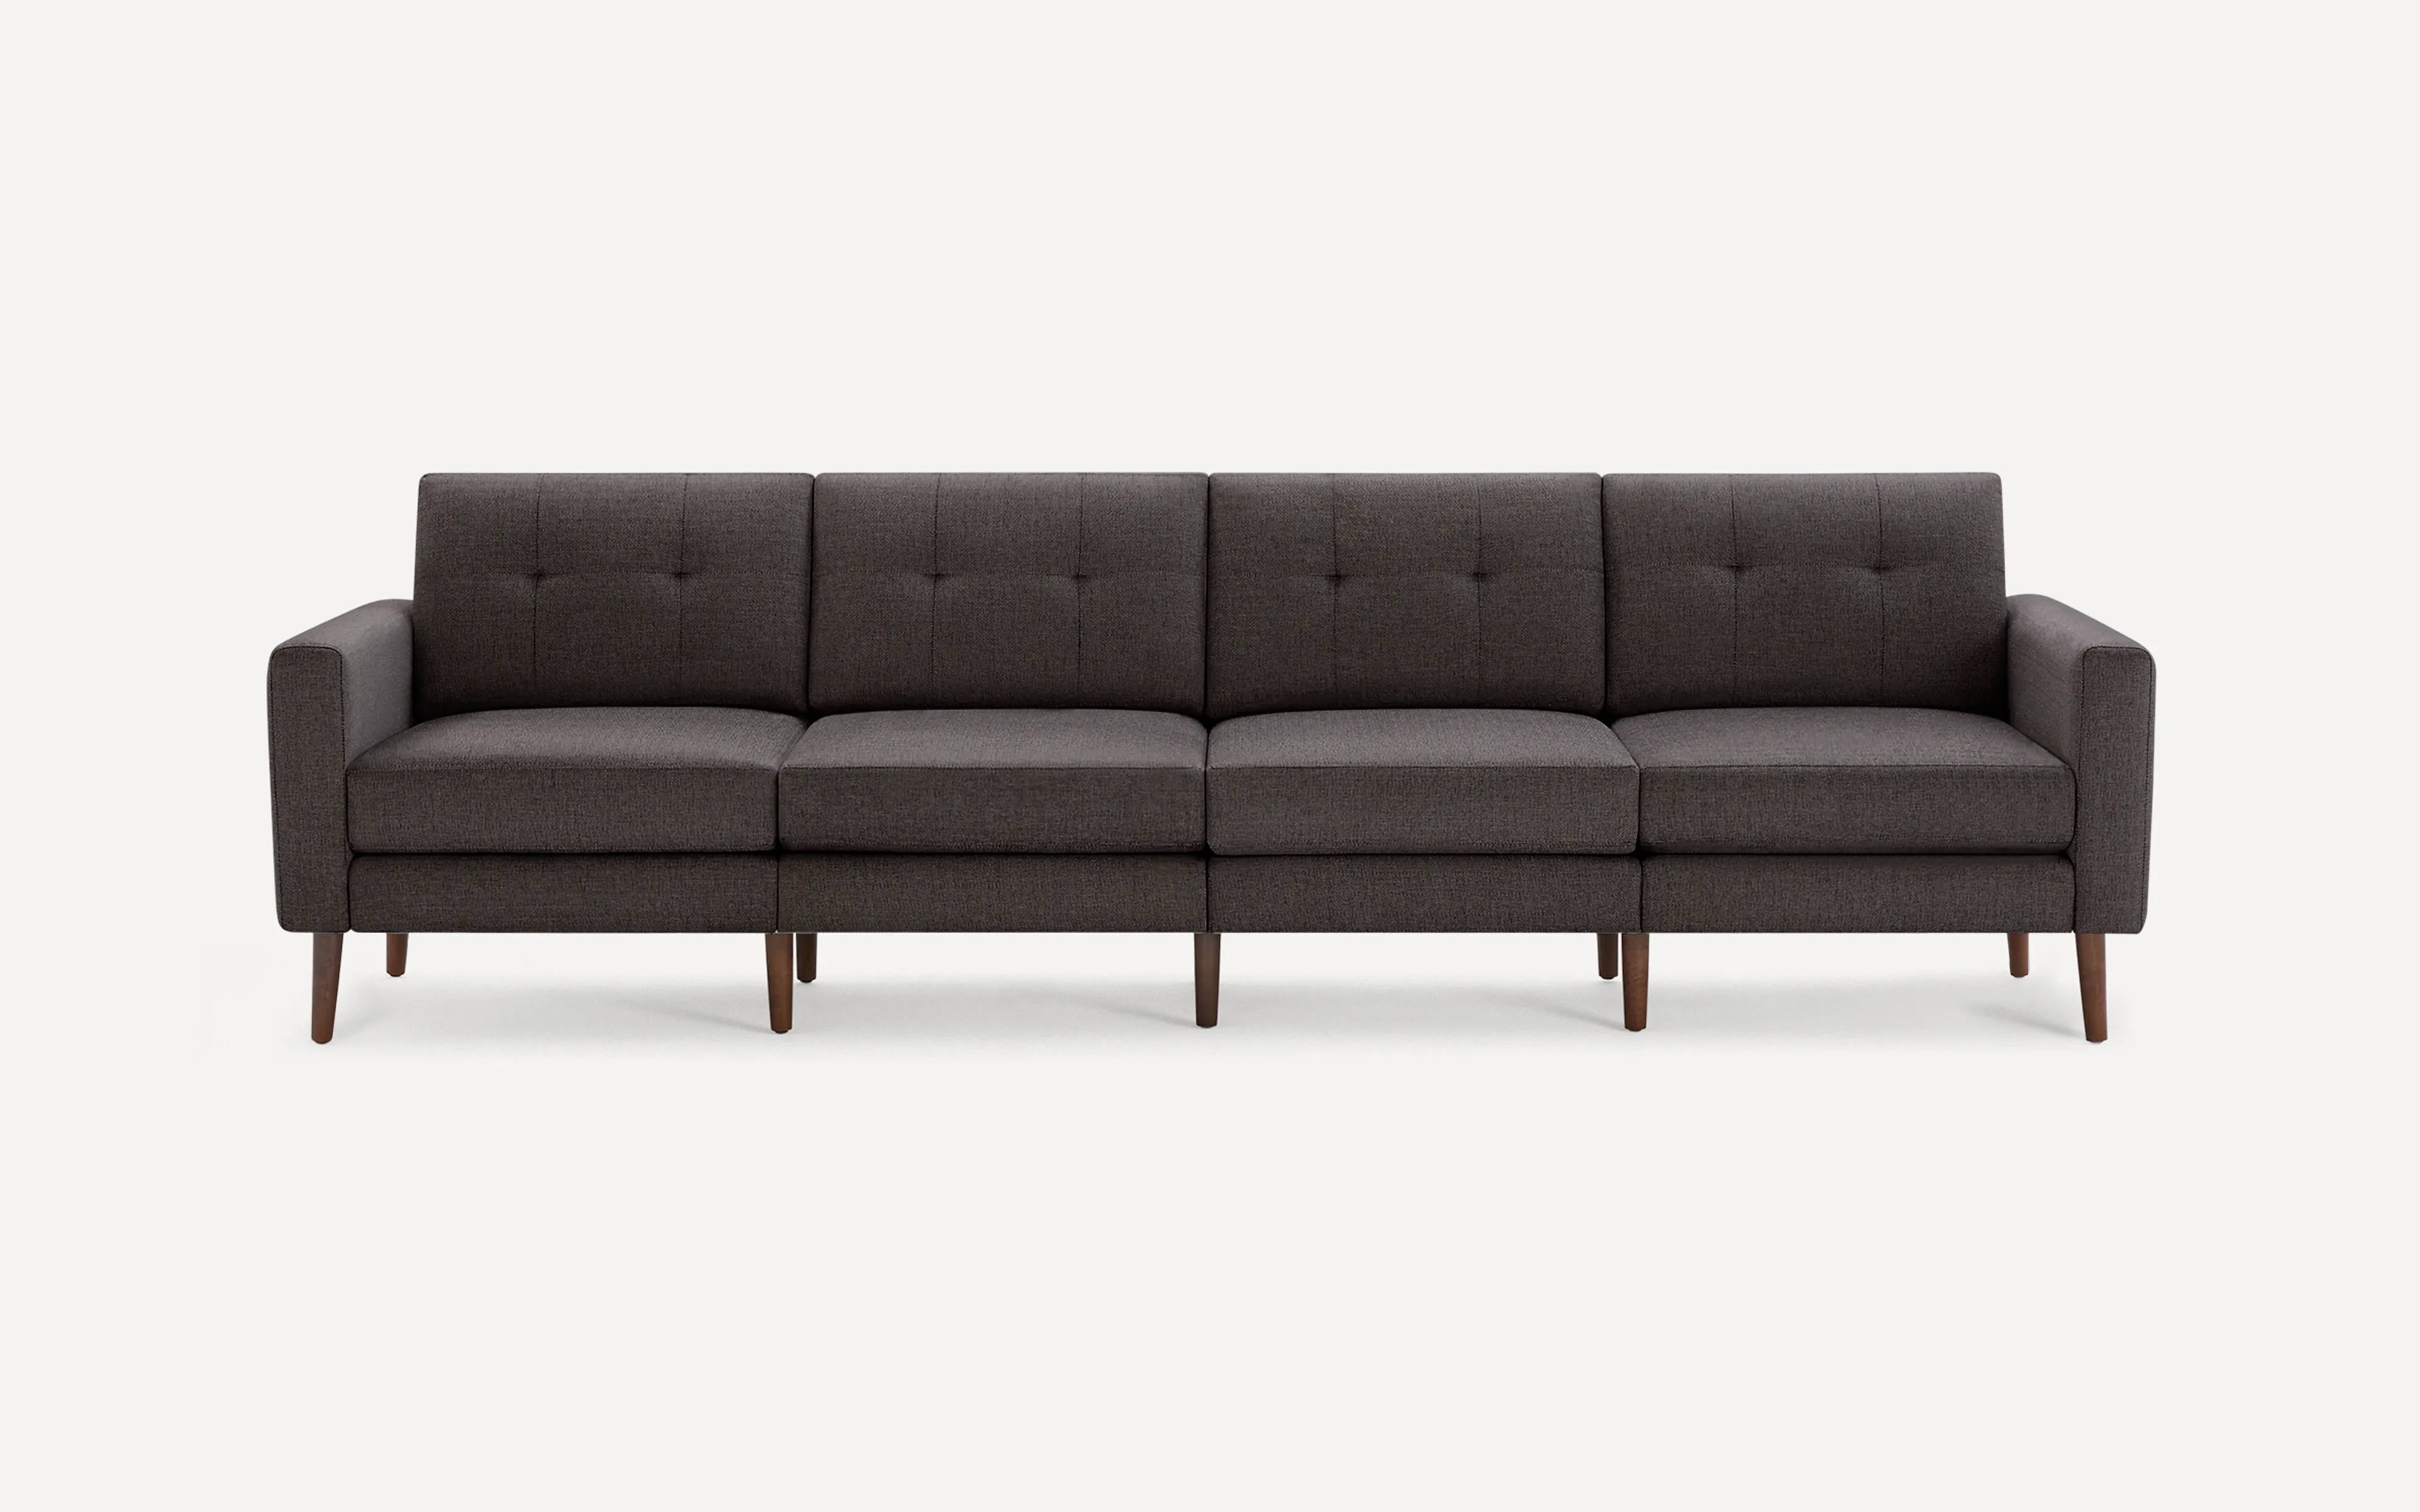 Original Nomad King Sofa in Charcoal Fabric